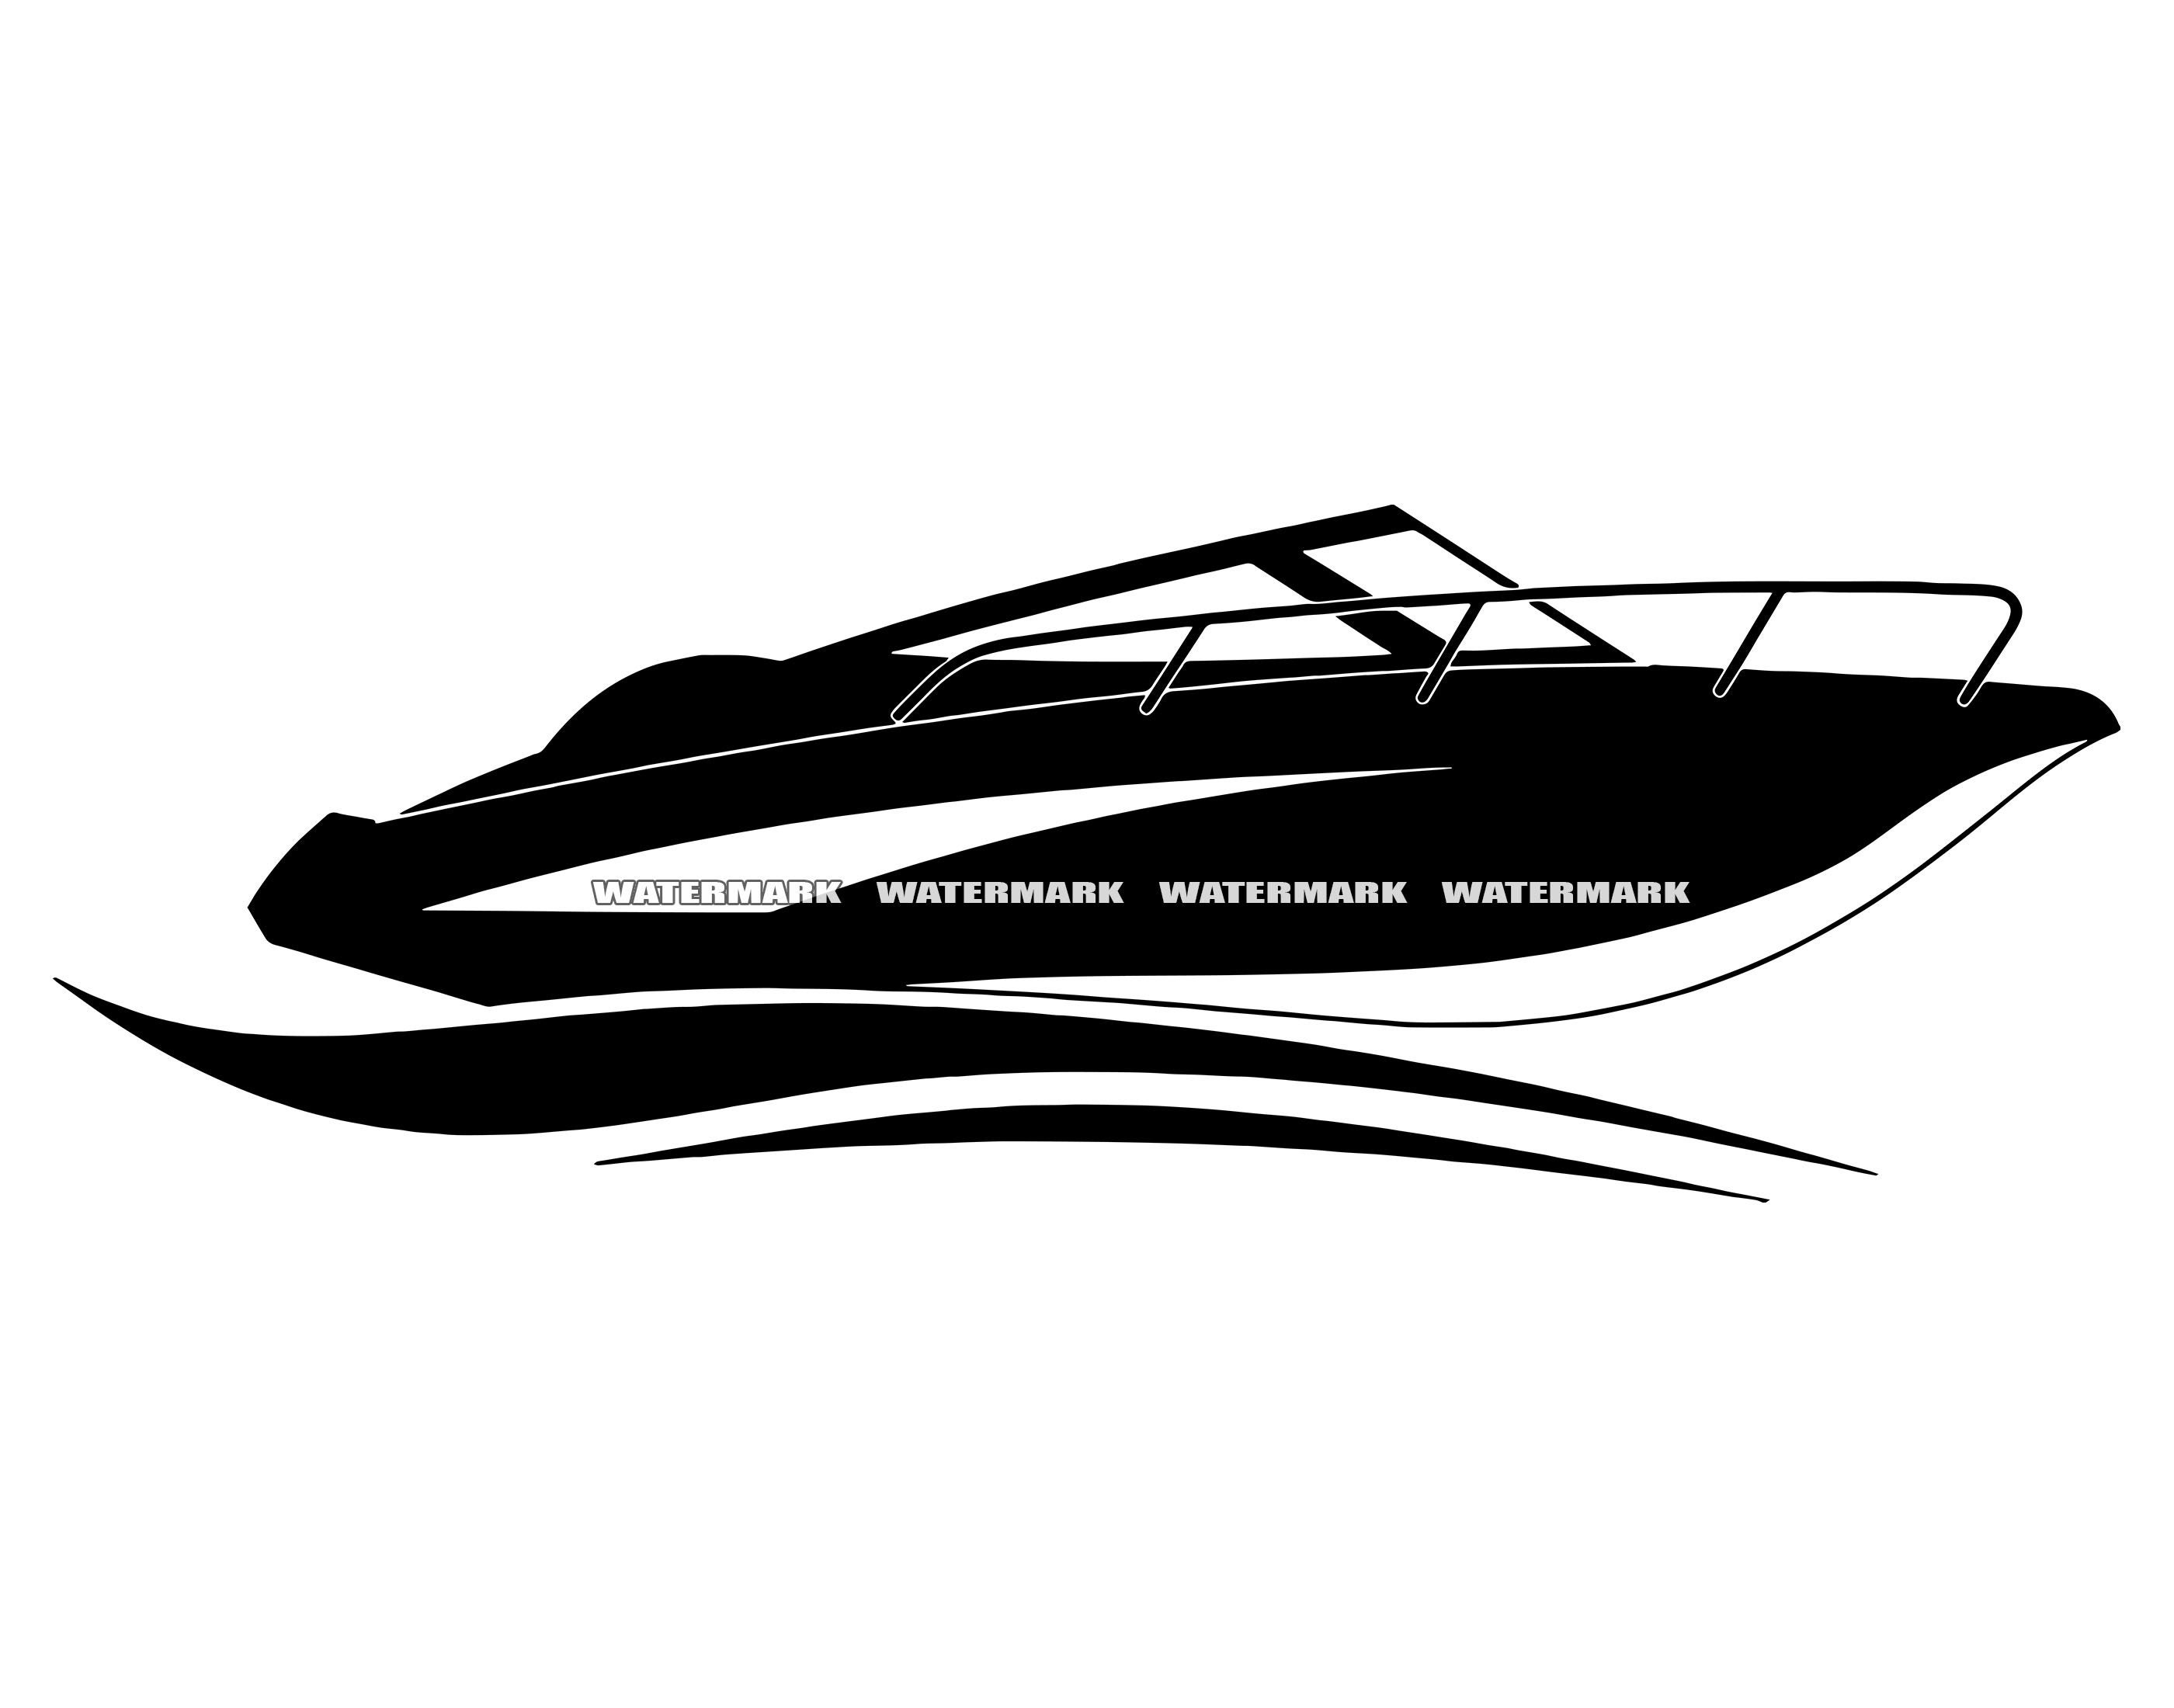 speed boat silhouette